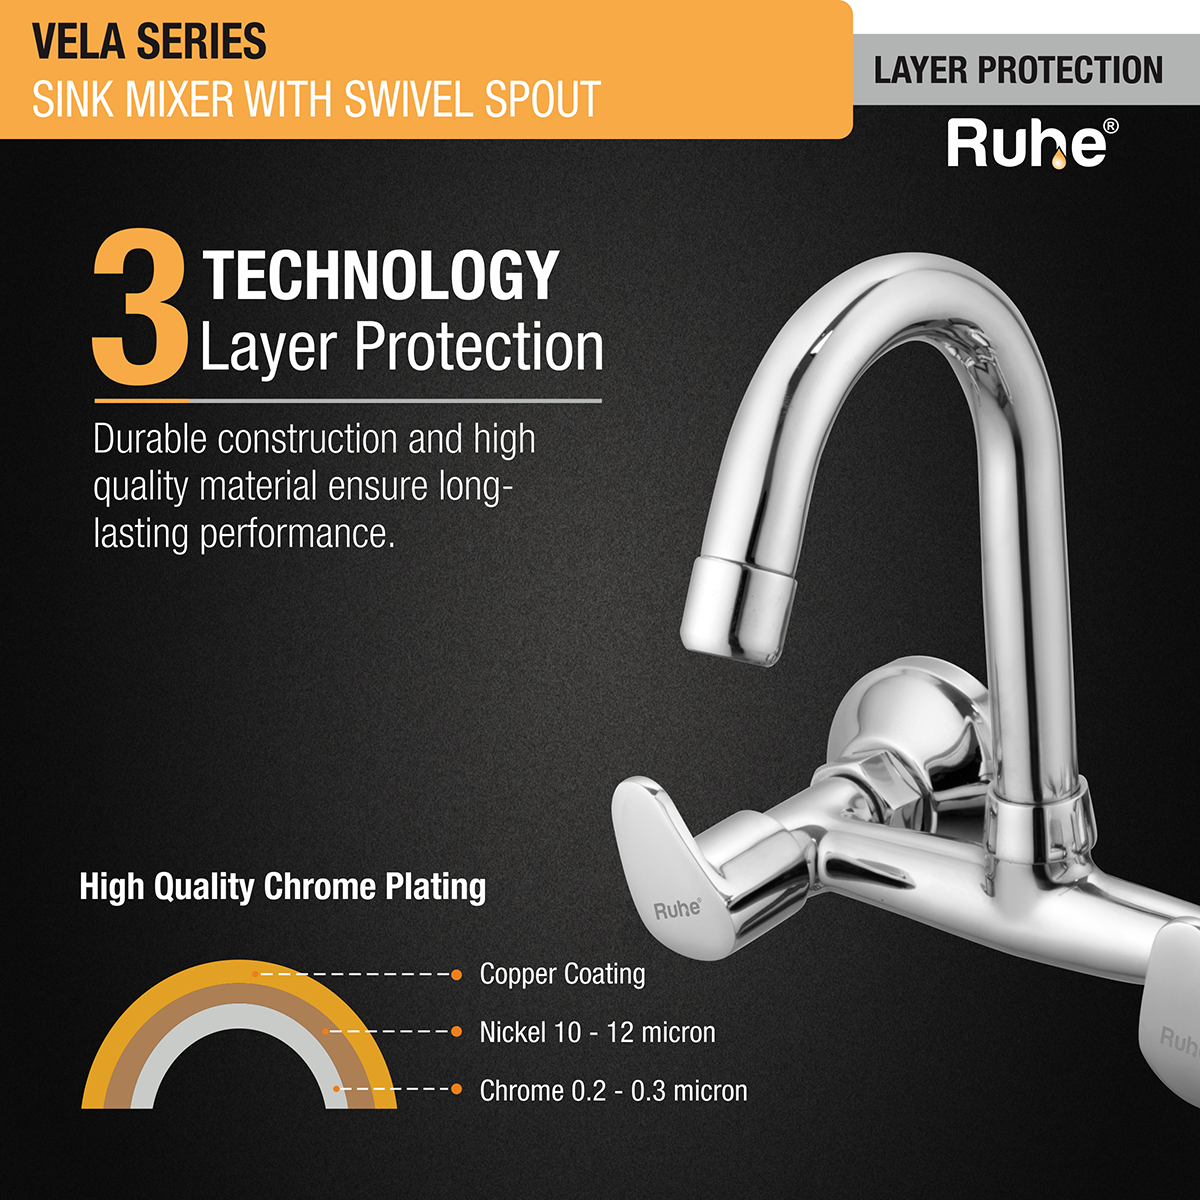 Vela Sink Mixer with Small (7 inches) Round Swivel Spout Faucet 3 layer protection